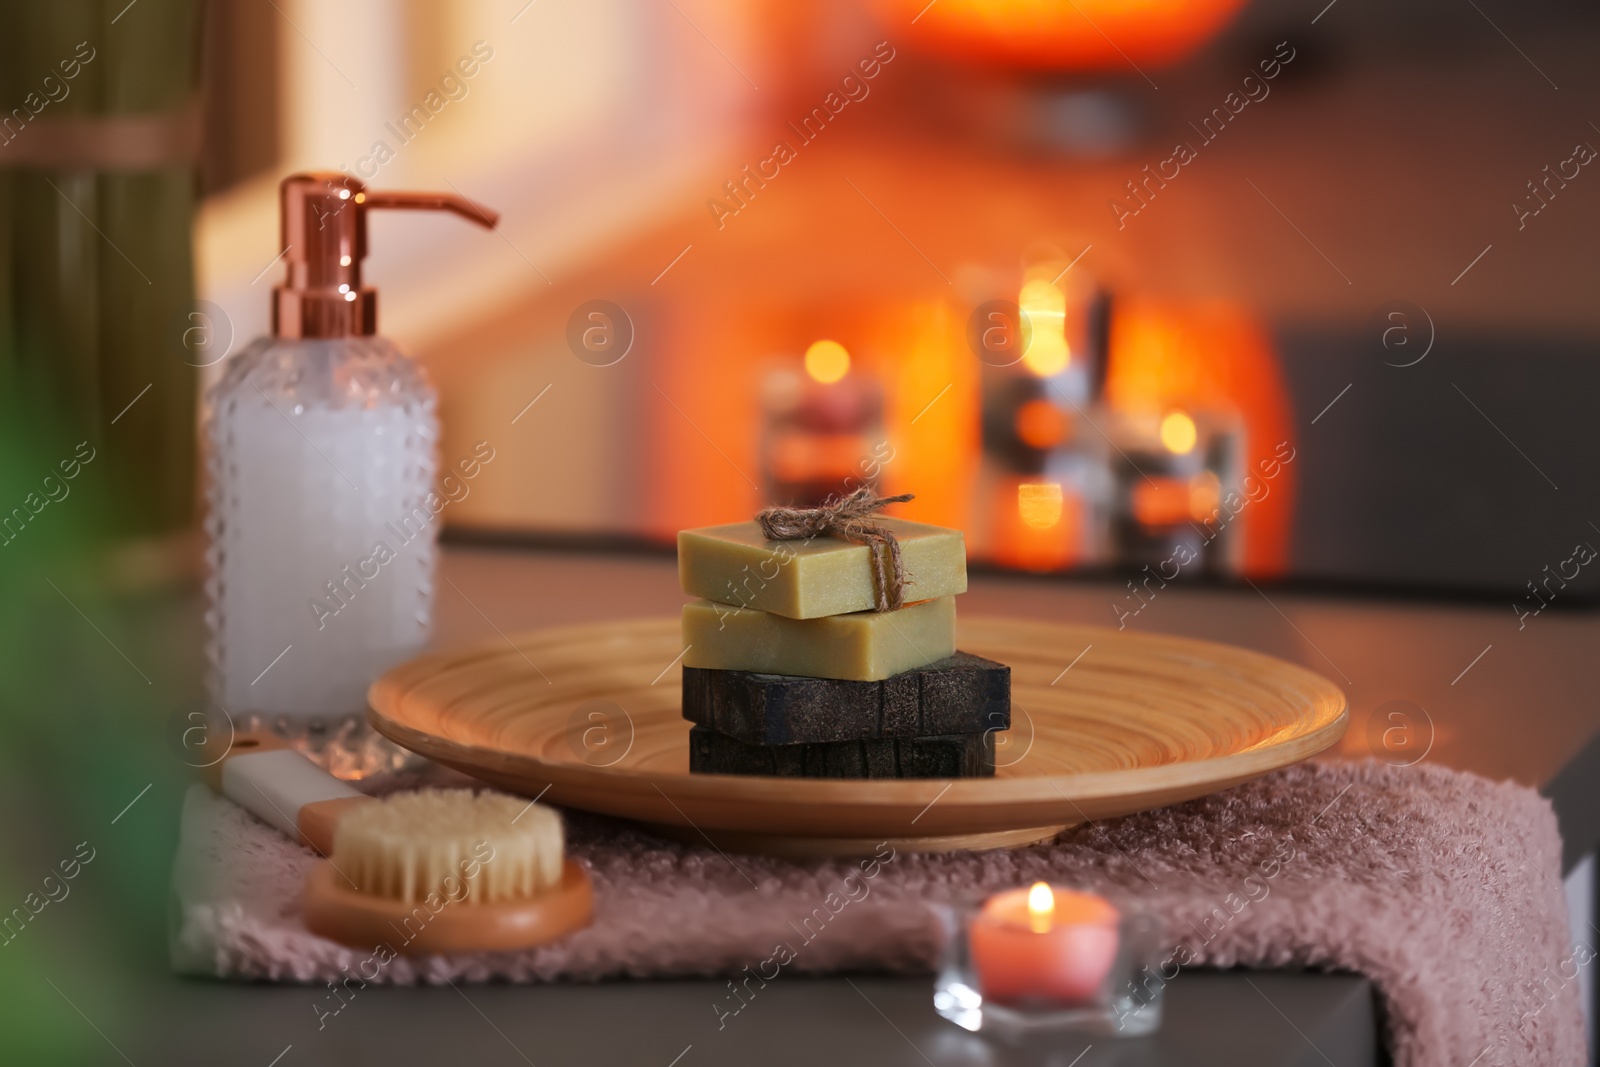 Photo of Bottle of shampoo and soap bars on table against blurred background